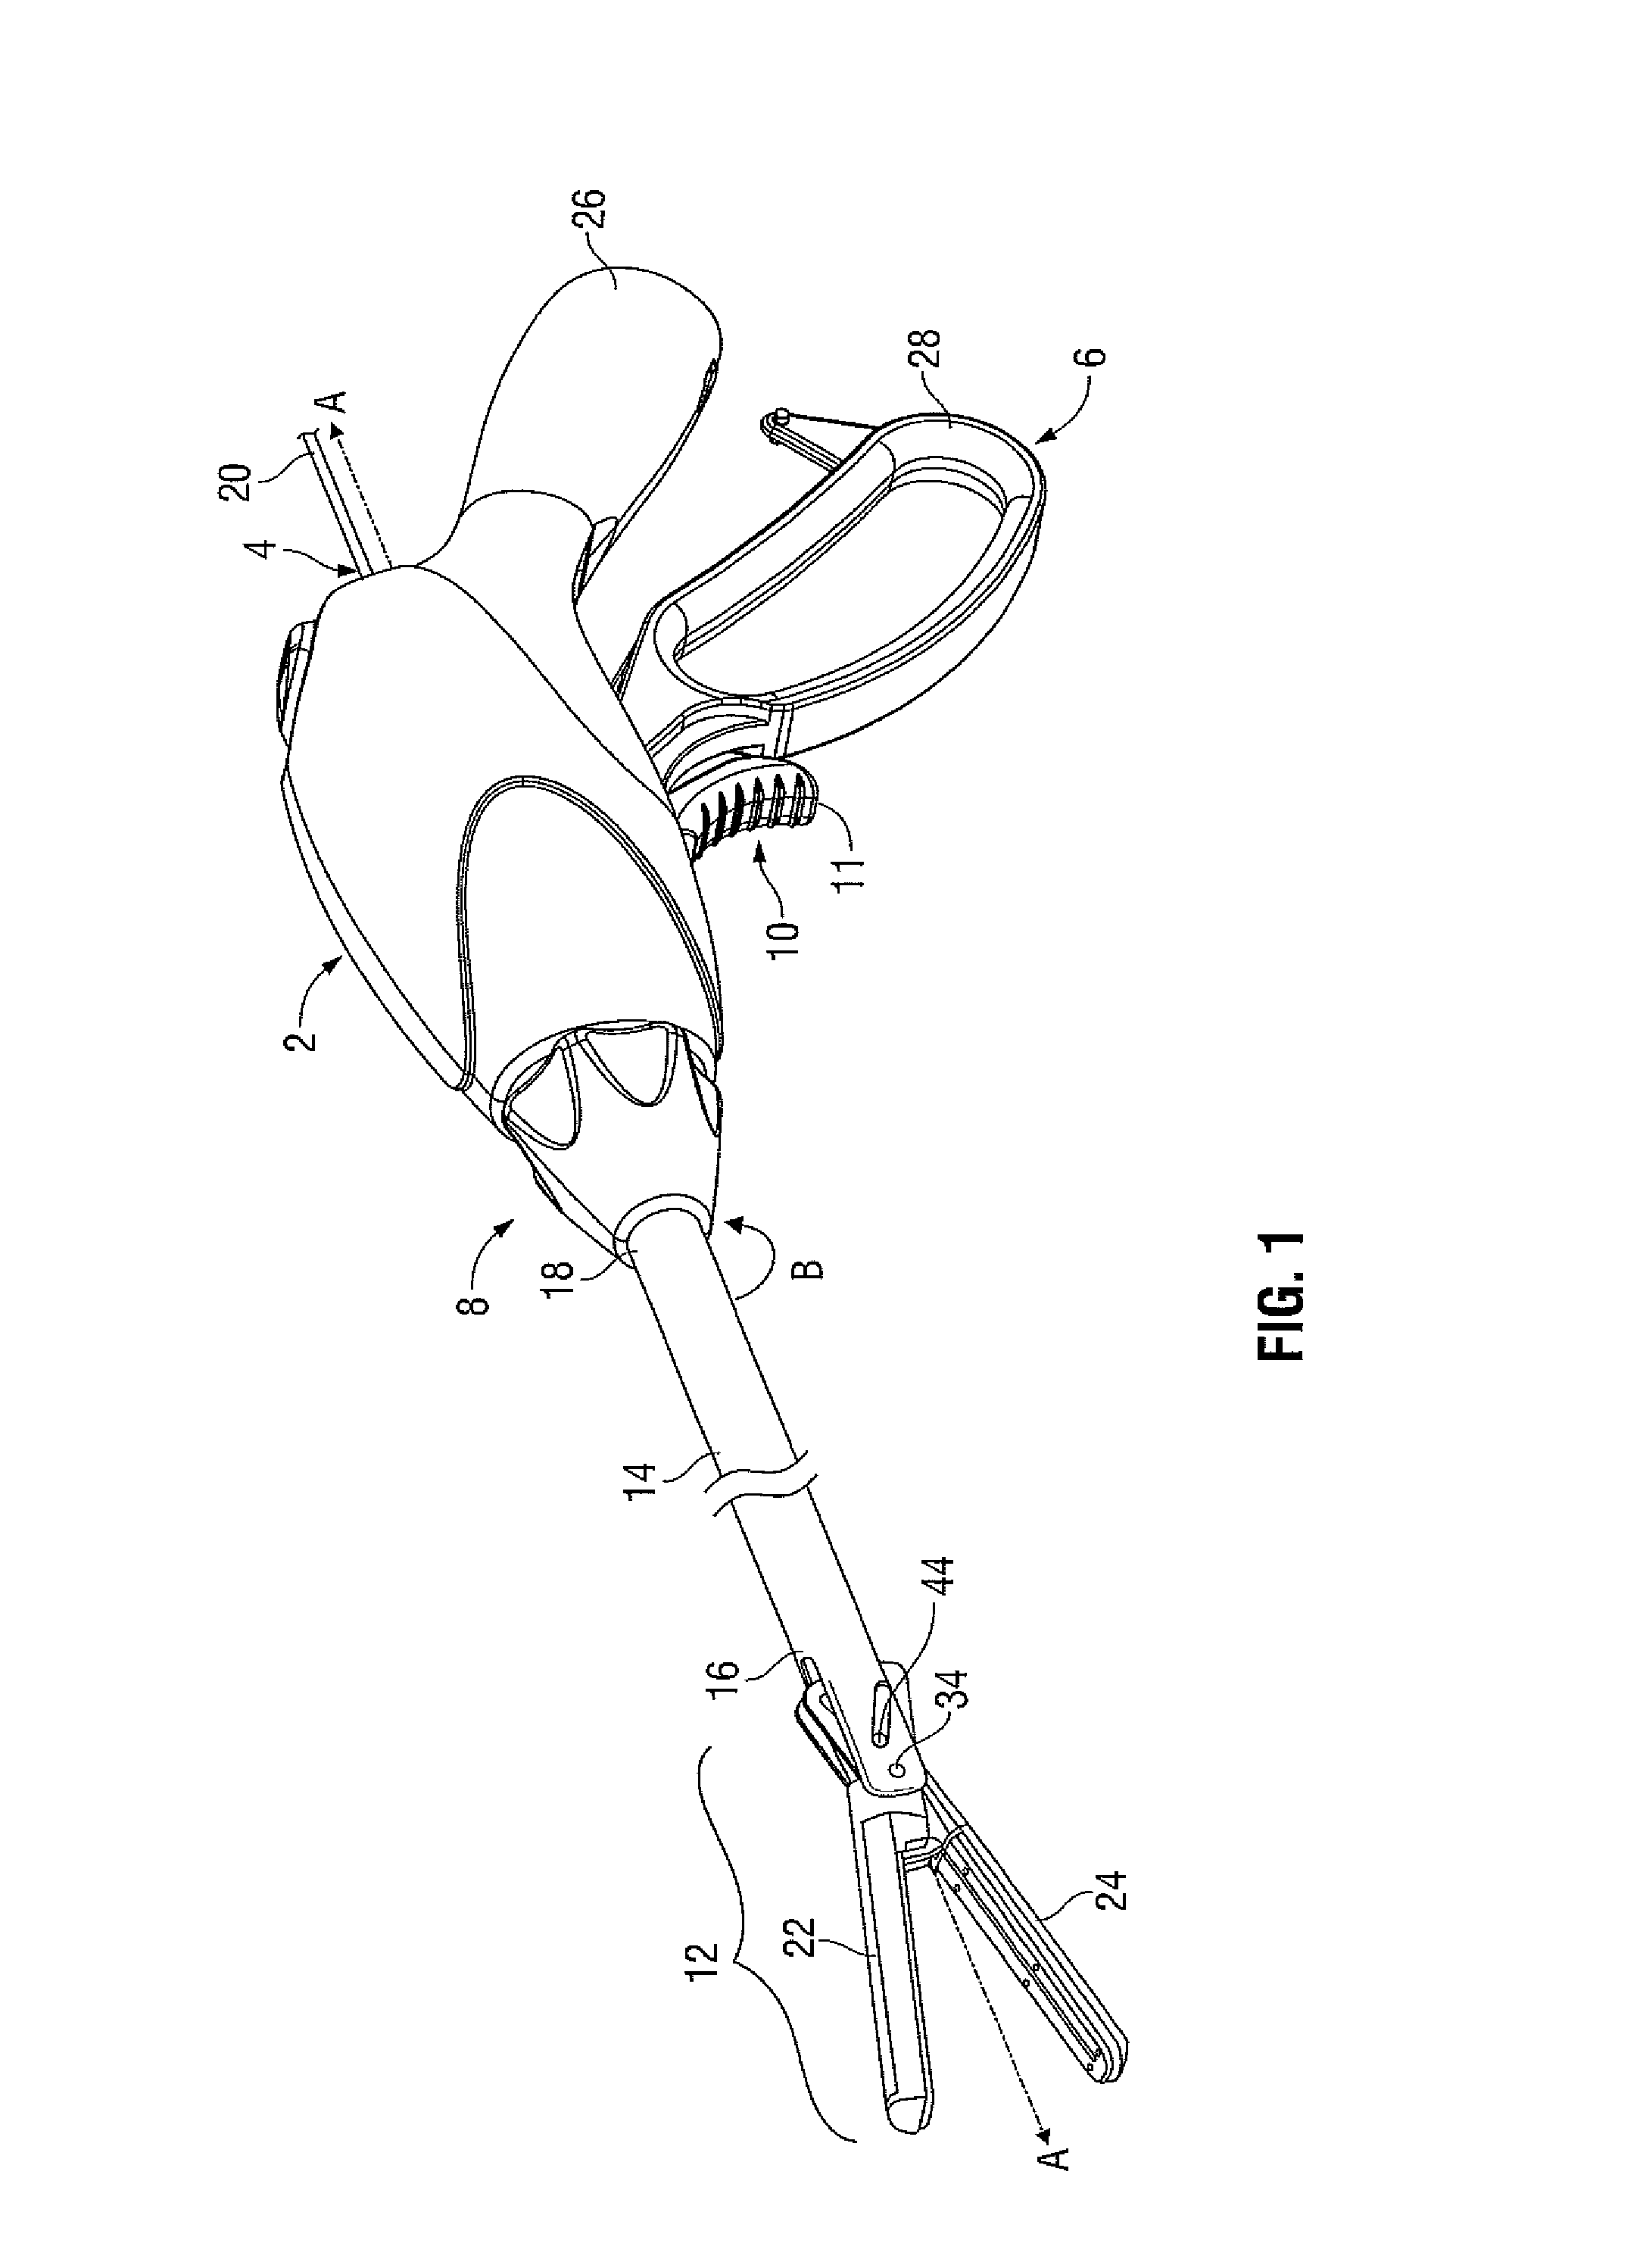 Electrosurgical Instrument with a Knife Blade Lockout Mechanism